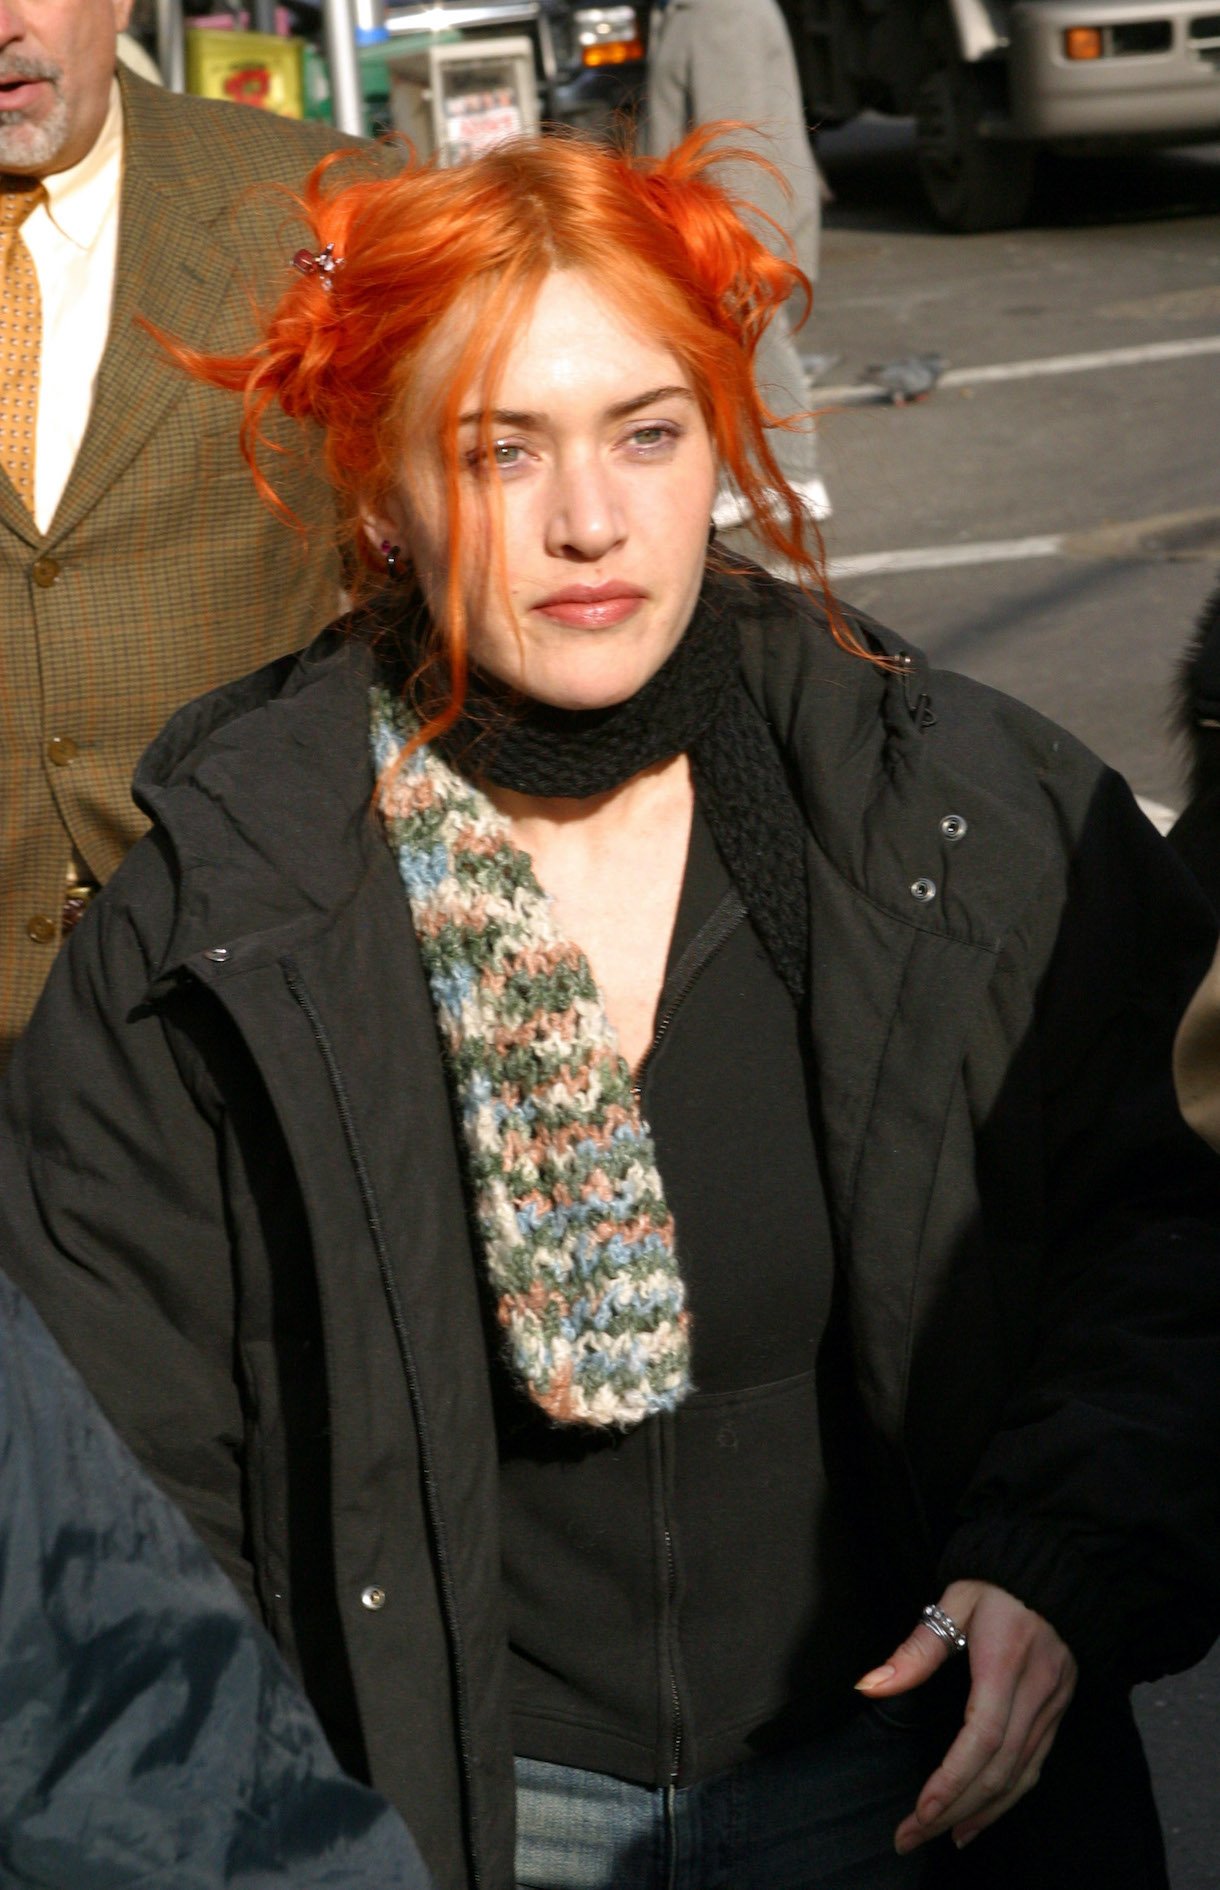 Jim Carrey and Kate Winslet On Location for 'Eternal Sunshine of the Spotless Mind' - New York